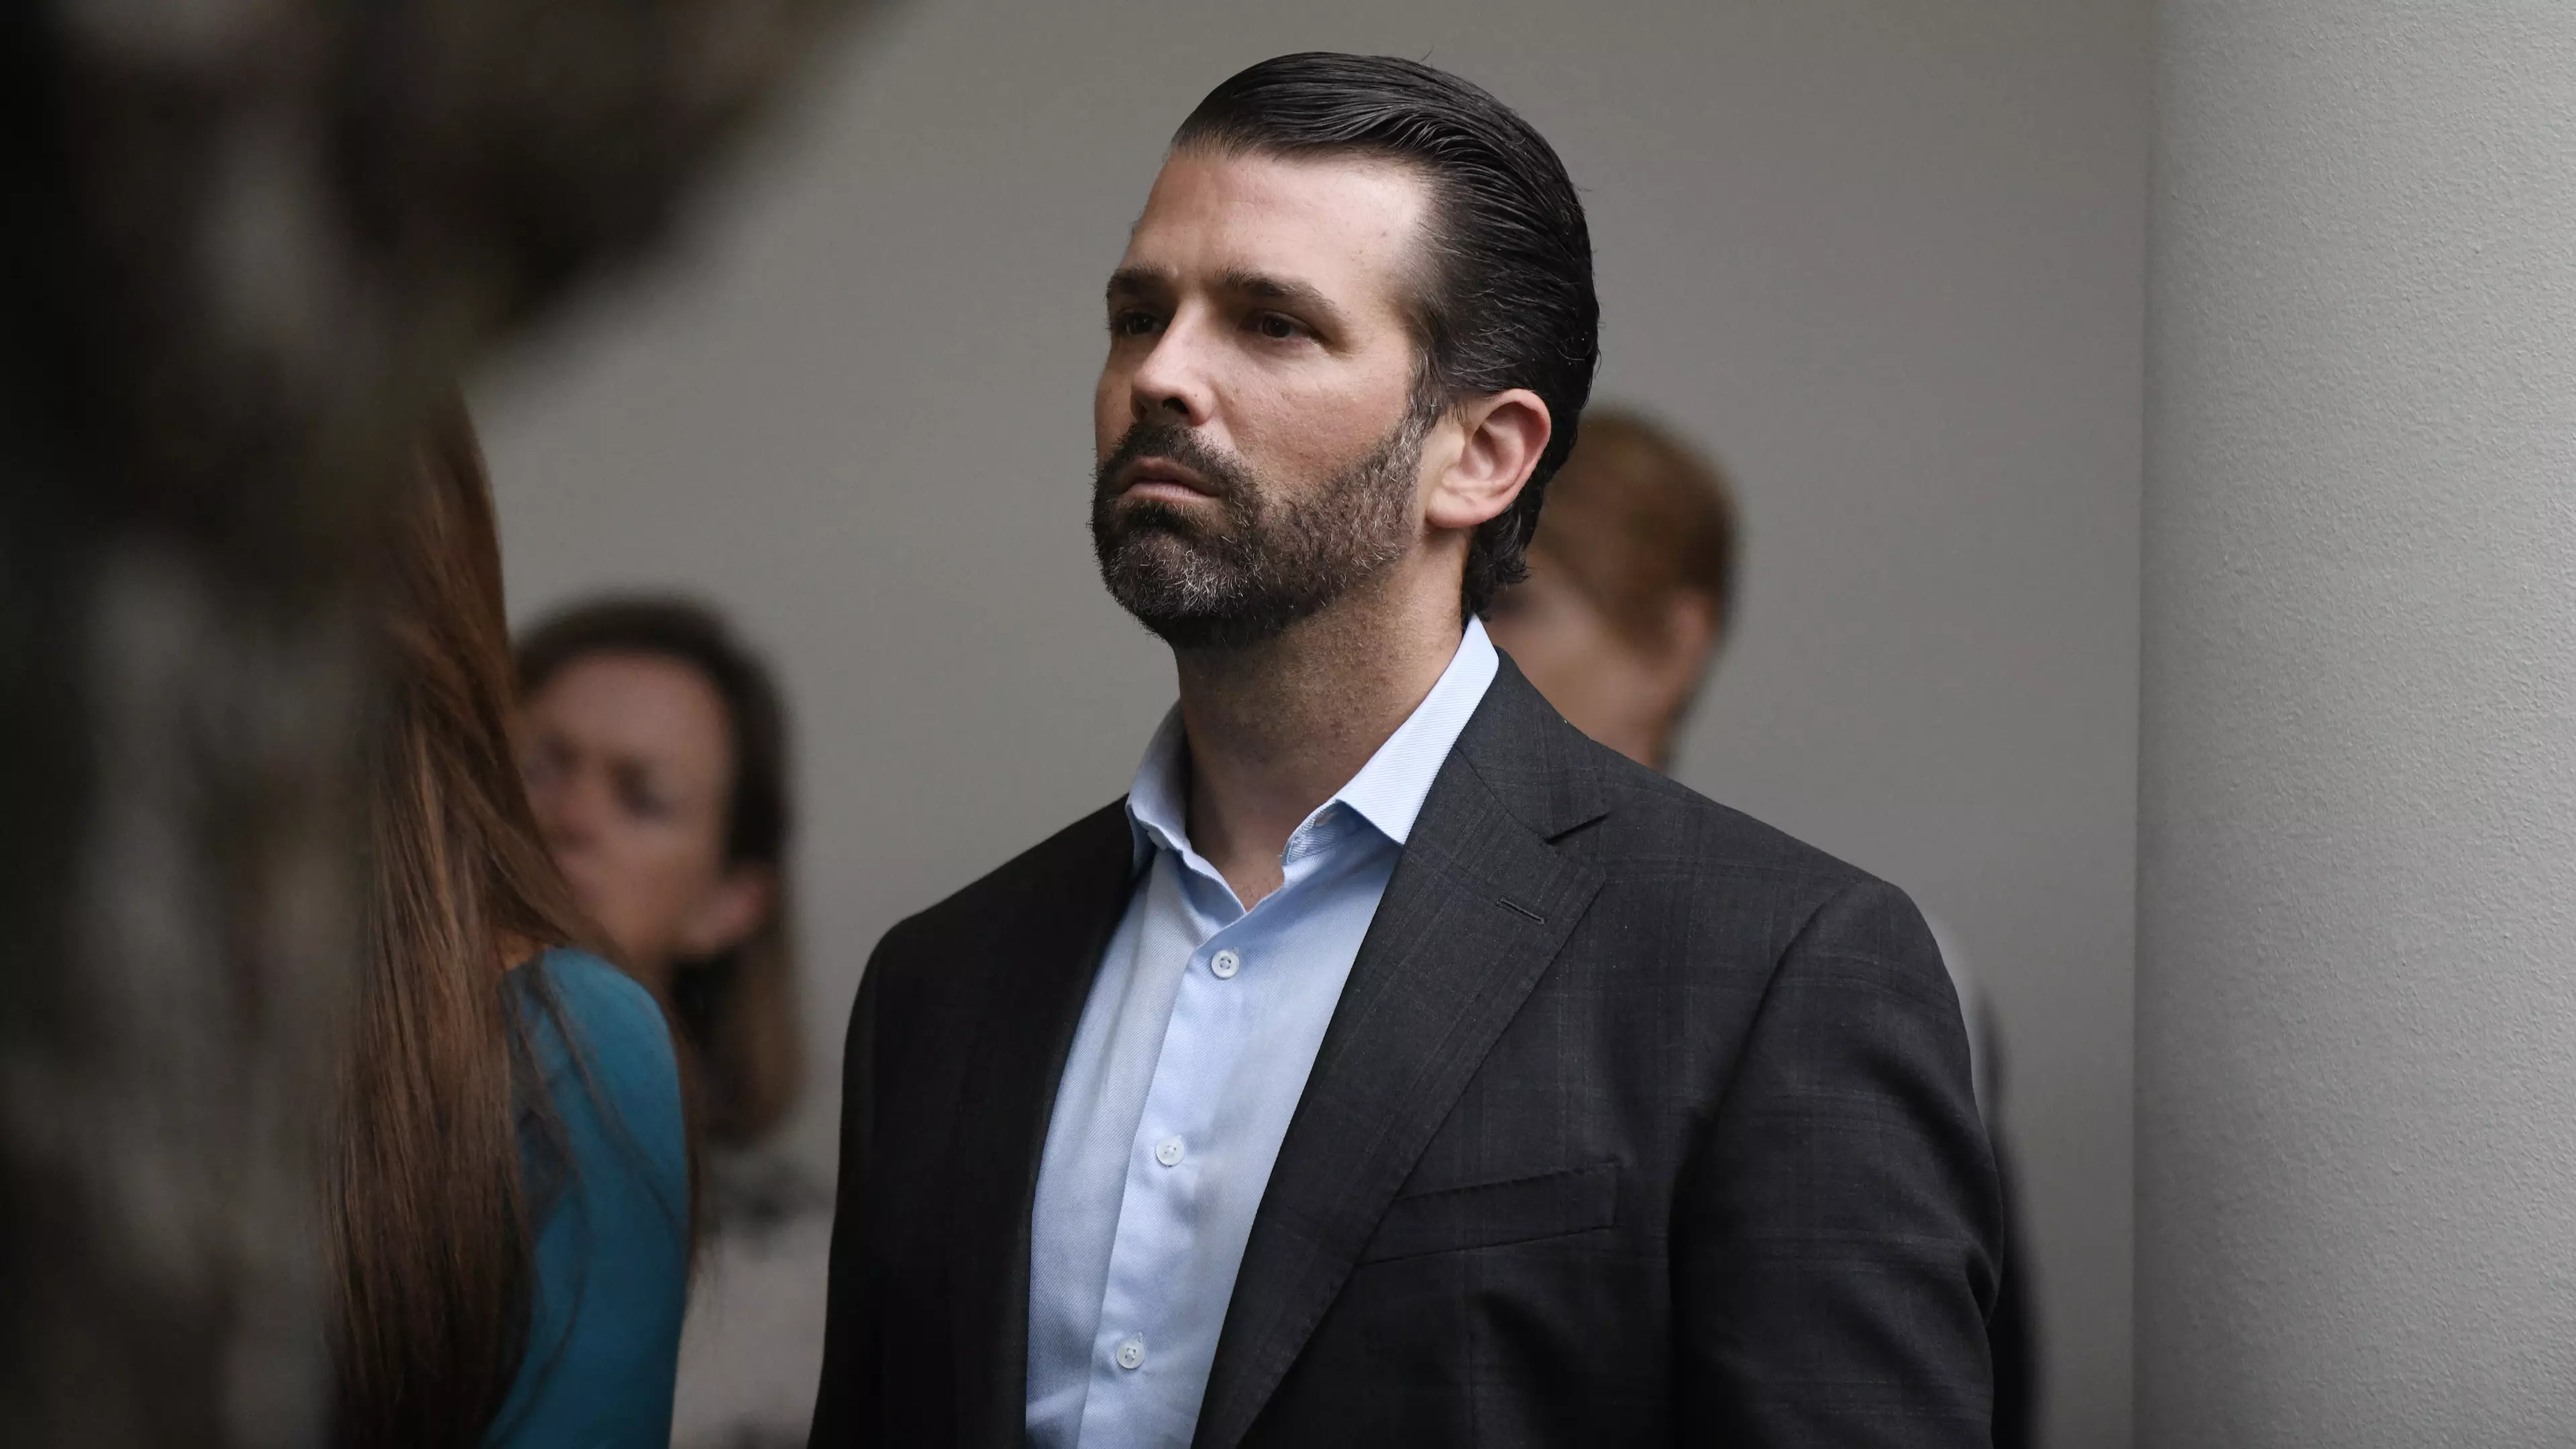 Donald Trump Jr Appears To Make Grammatical Error On His Book Cover